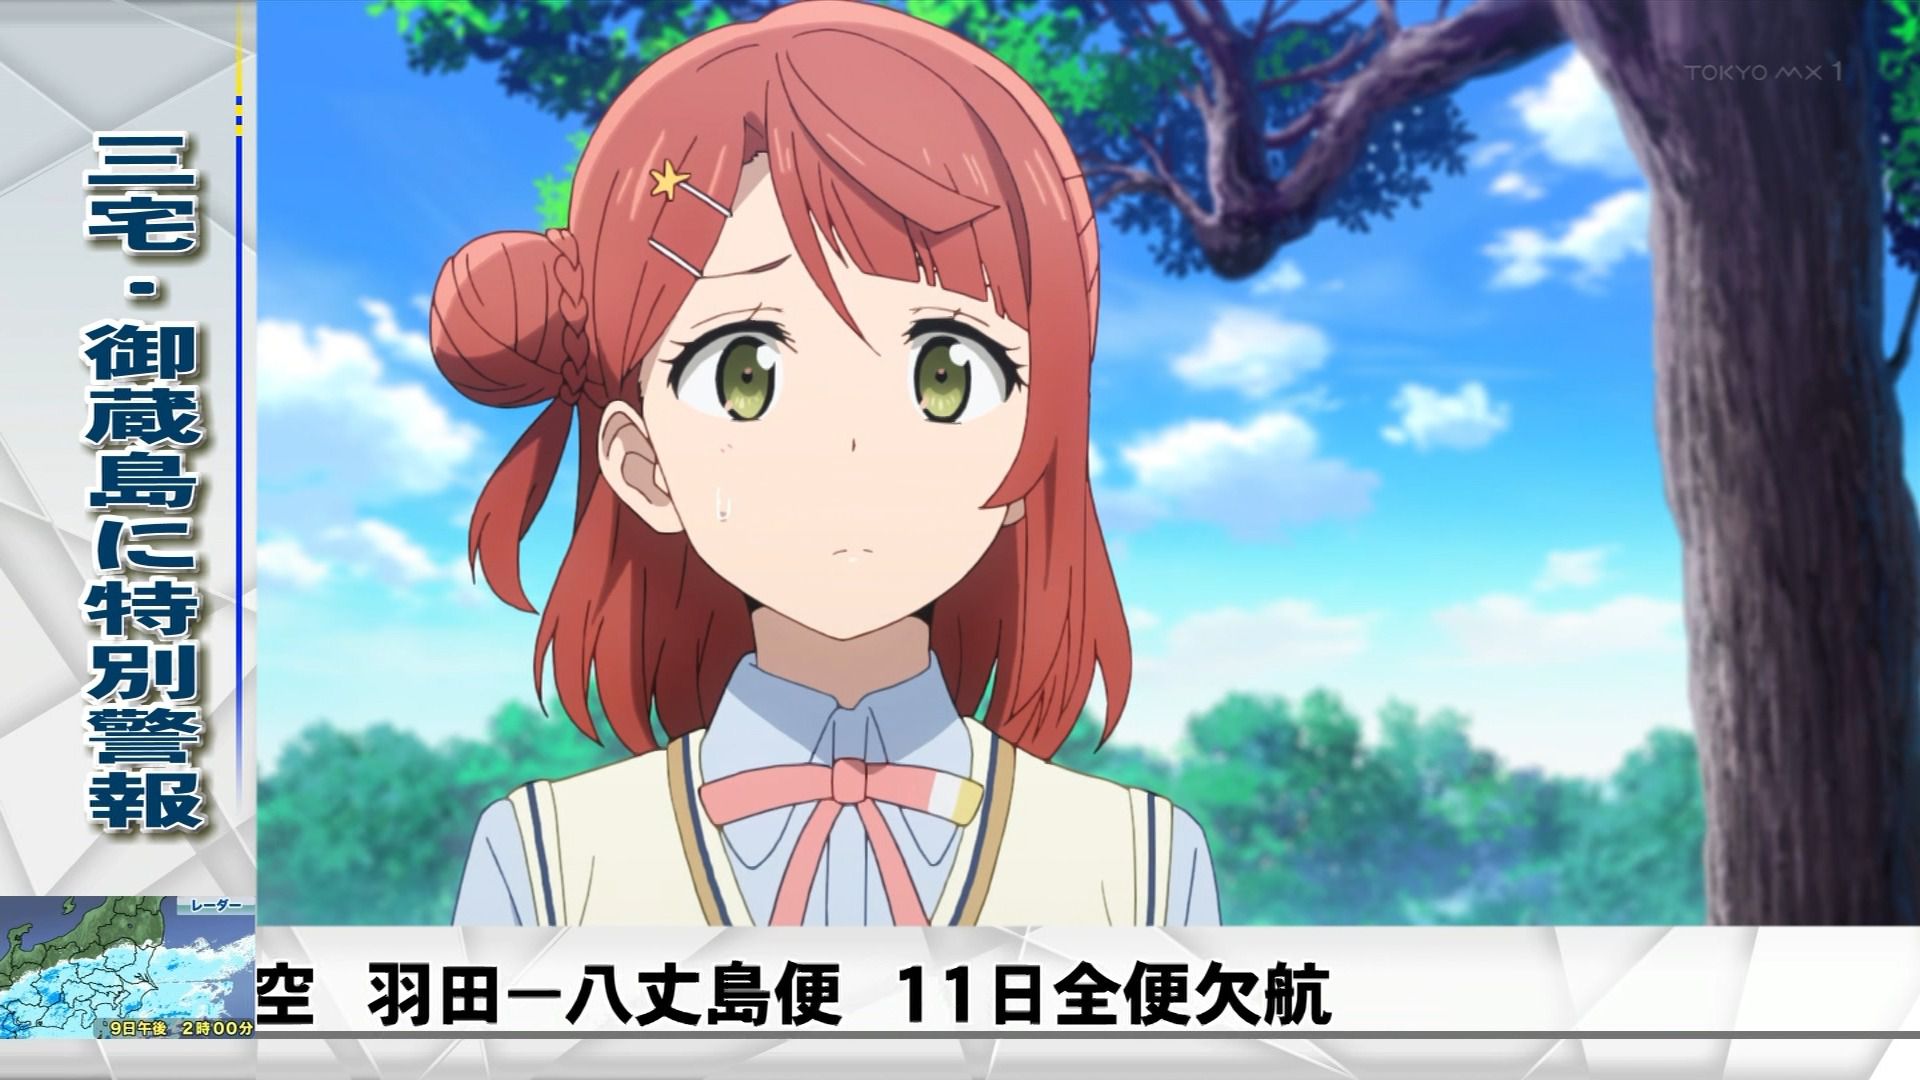 Moe Amusement Park: Love Live! Rainbowgasaki Gakuen School Idol Association" 2 episodes impression. The new character is also buhi power high! Everyone is too cute after all on top! ! 13